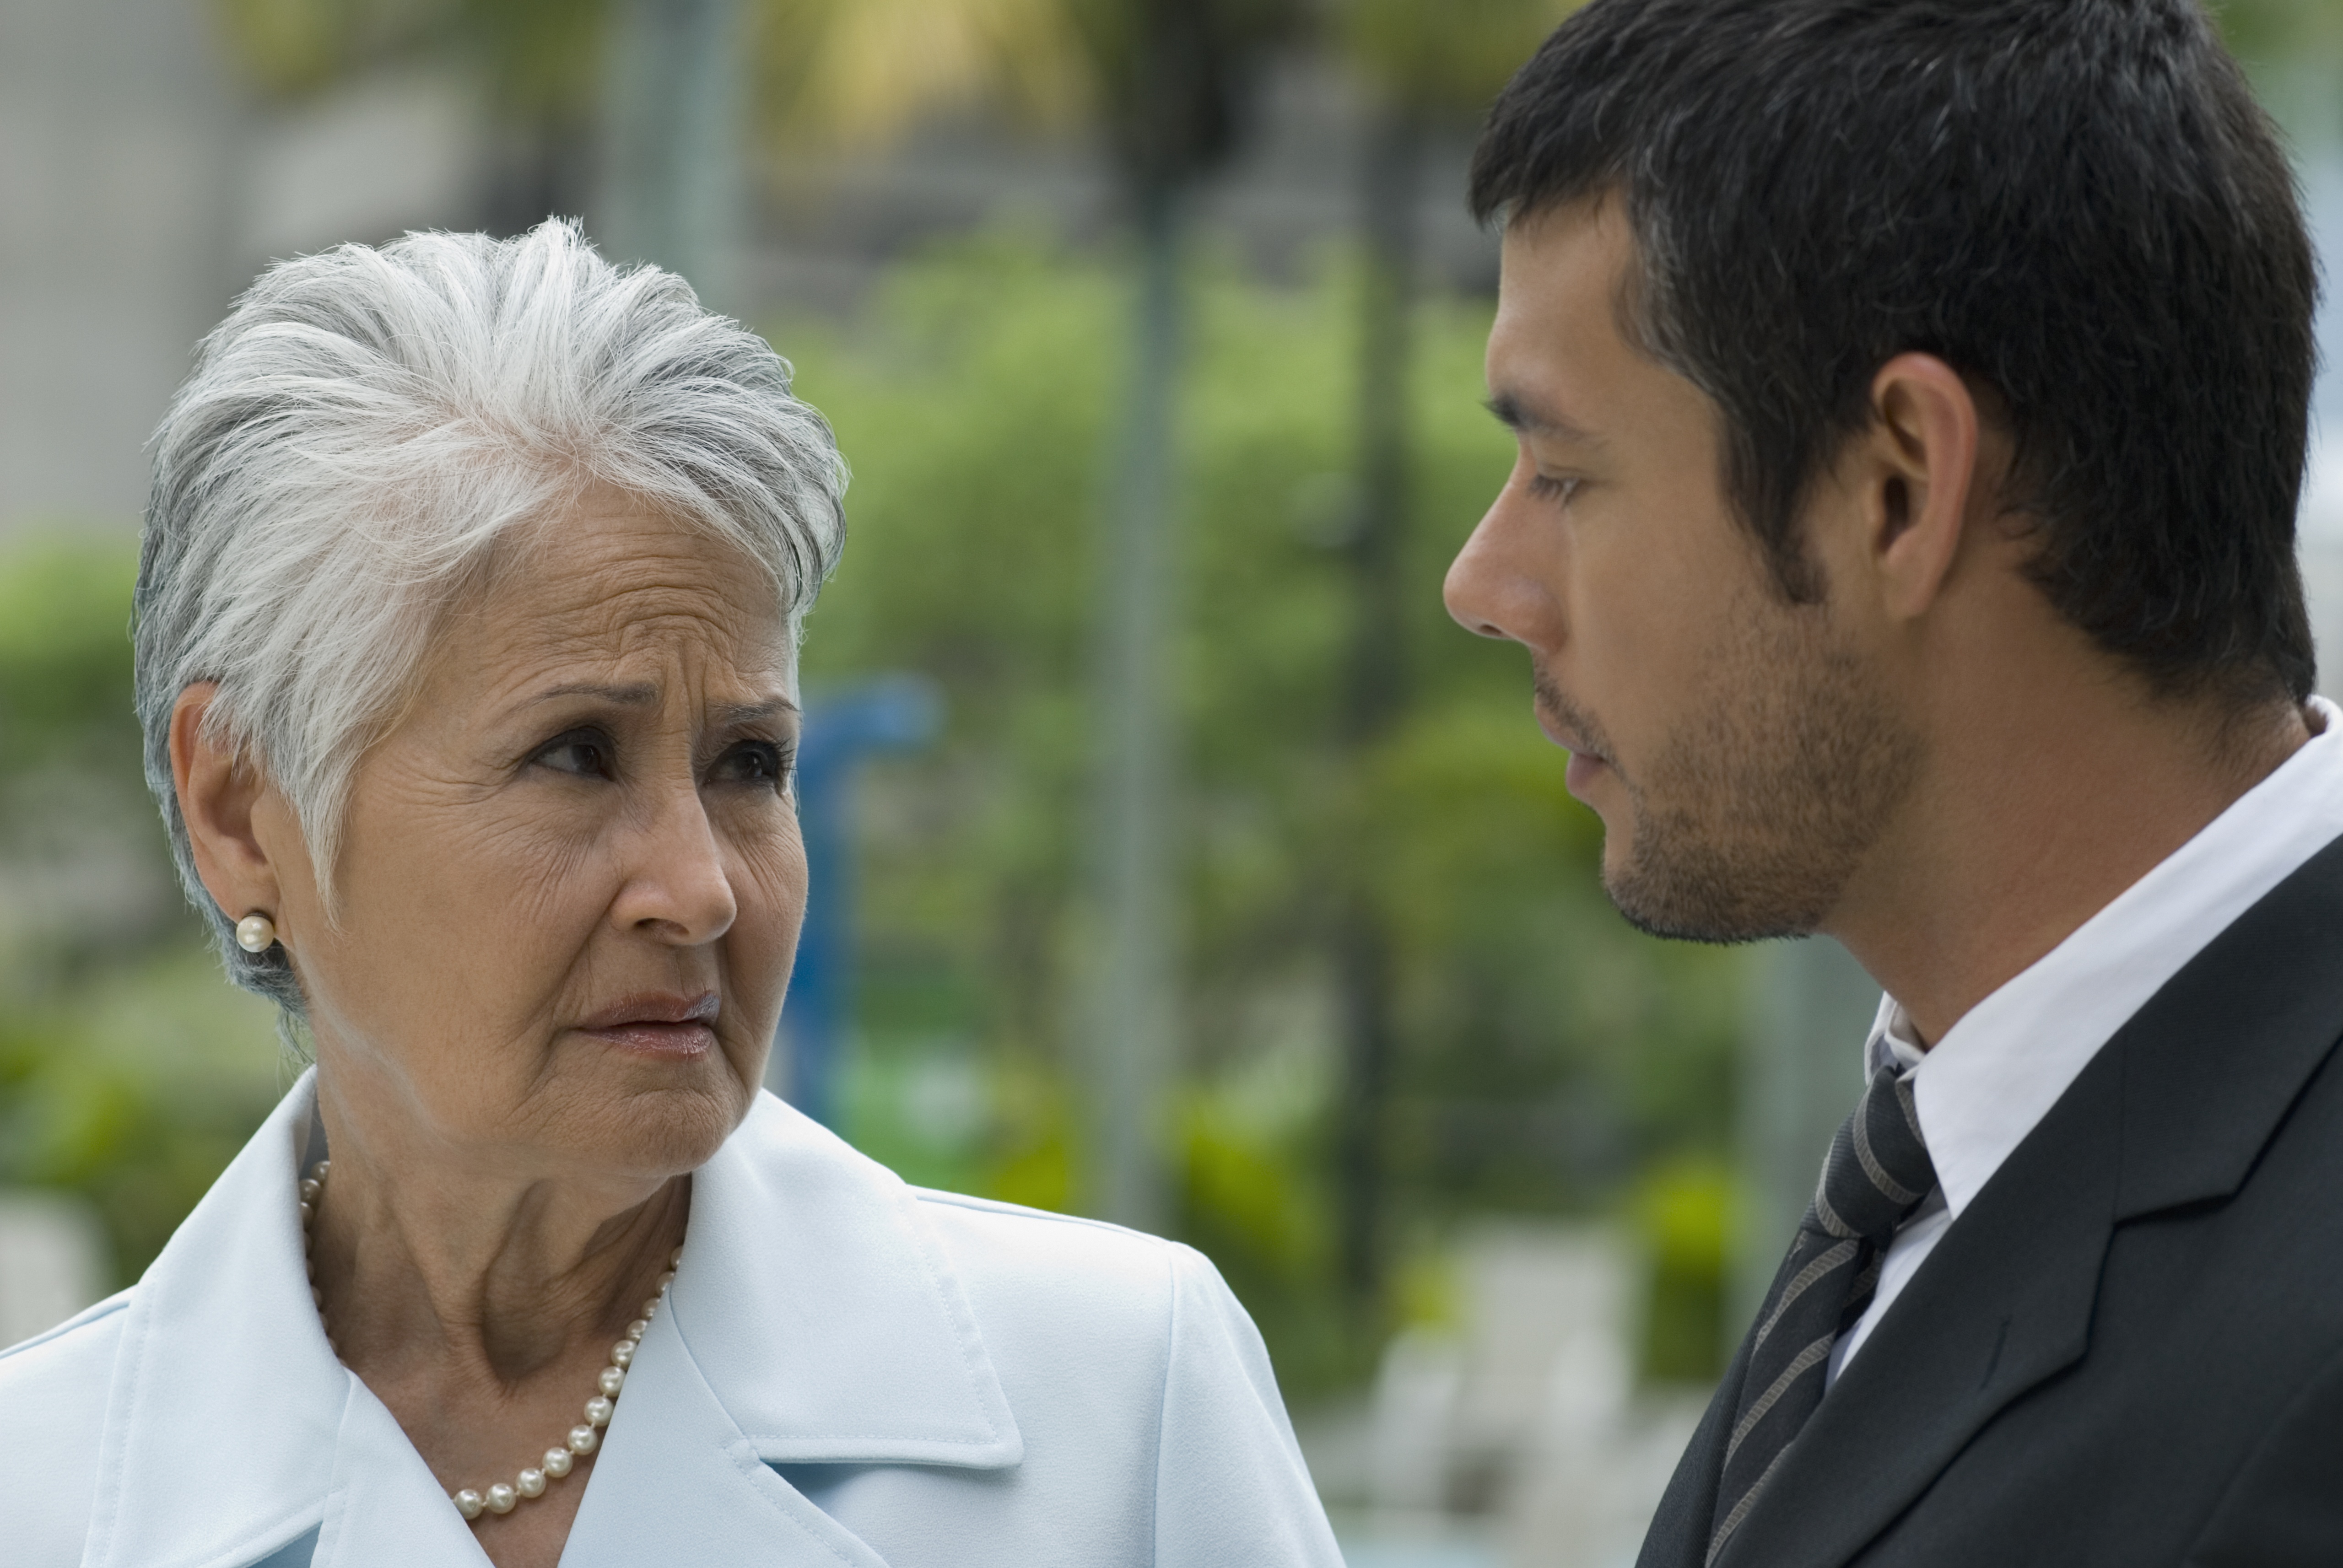 Hispanic mother and adult son talking | Source: Getty Images